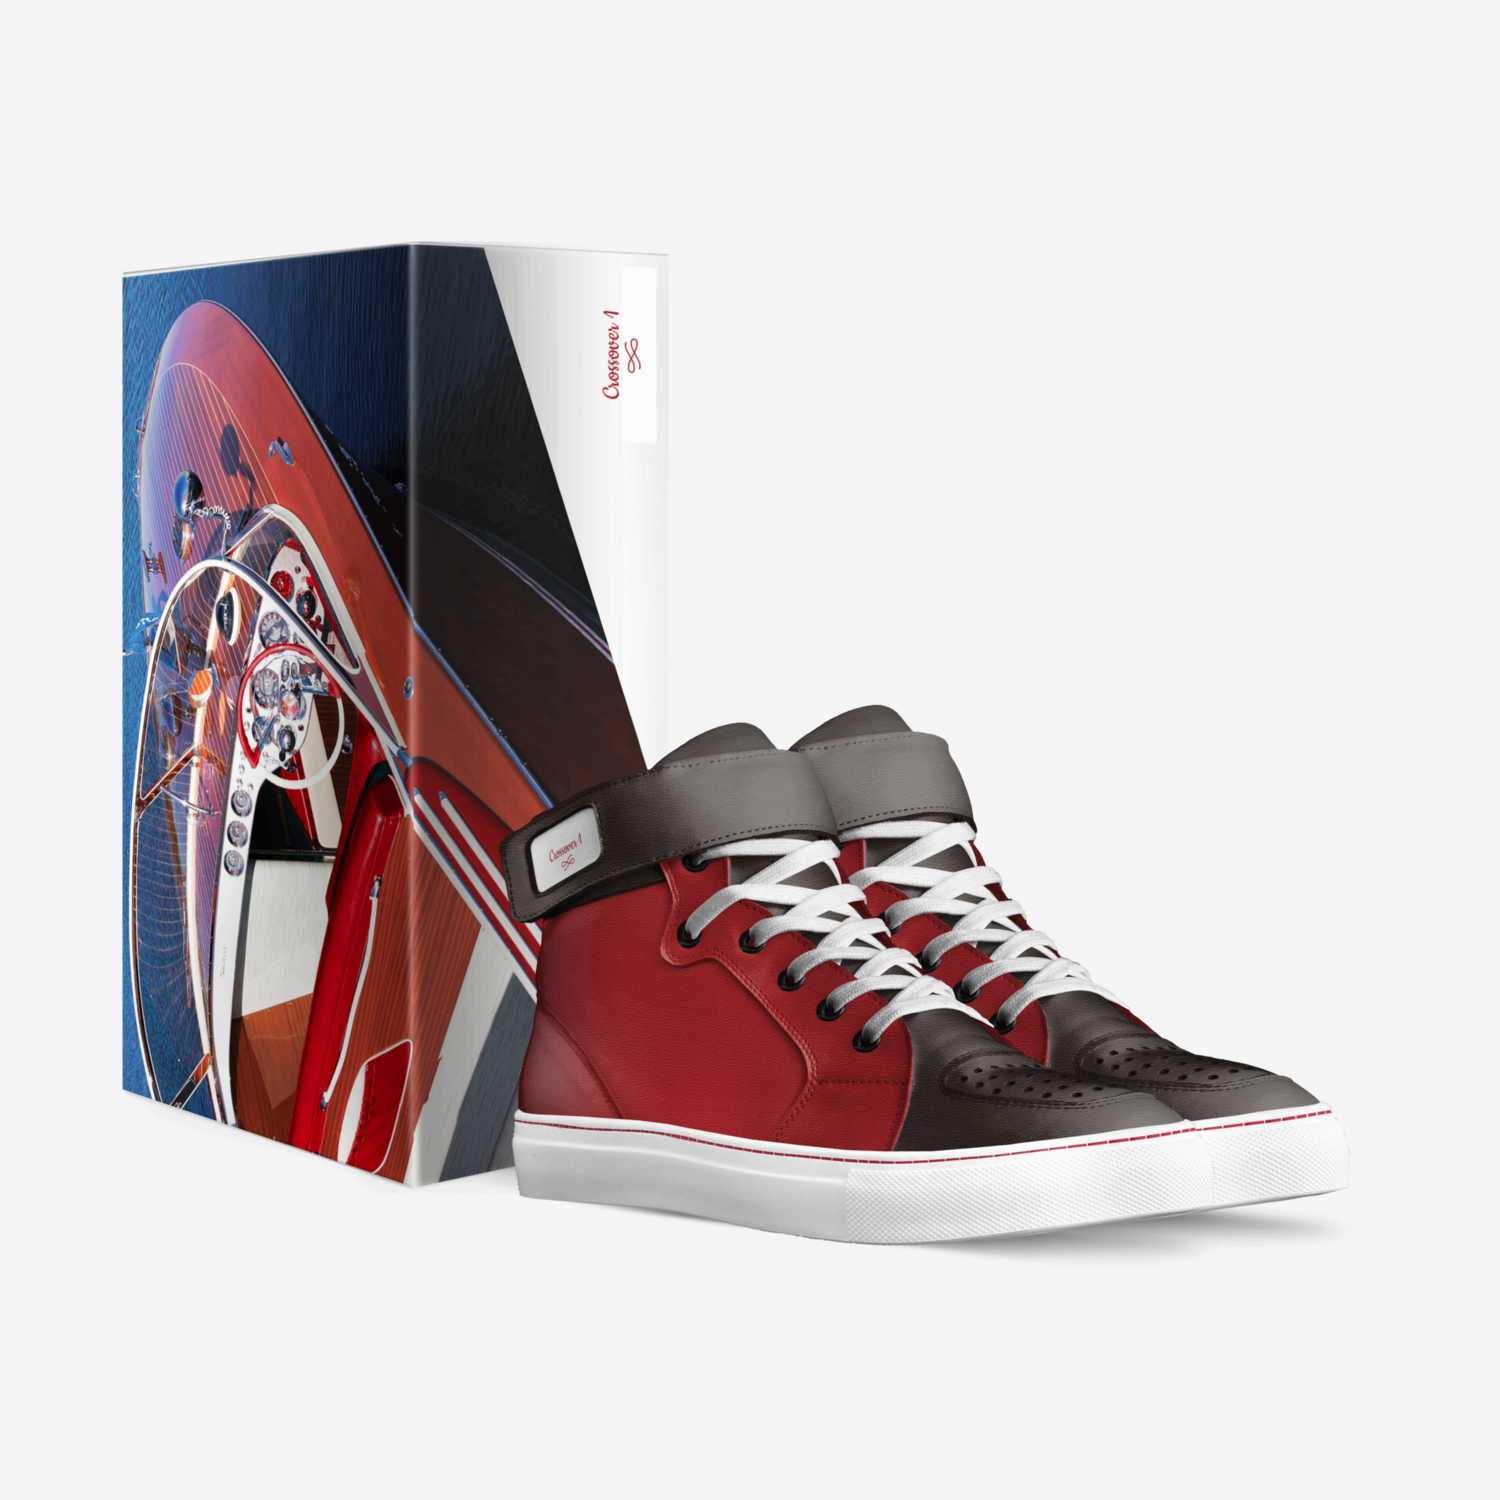 Crossover 1 custom made in Italy shoes by Carter Penick | Box view